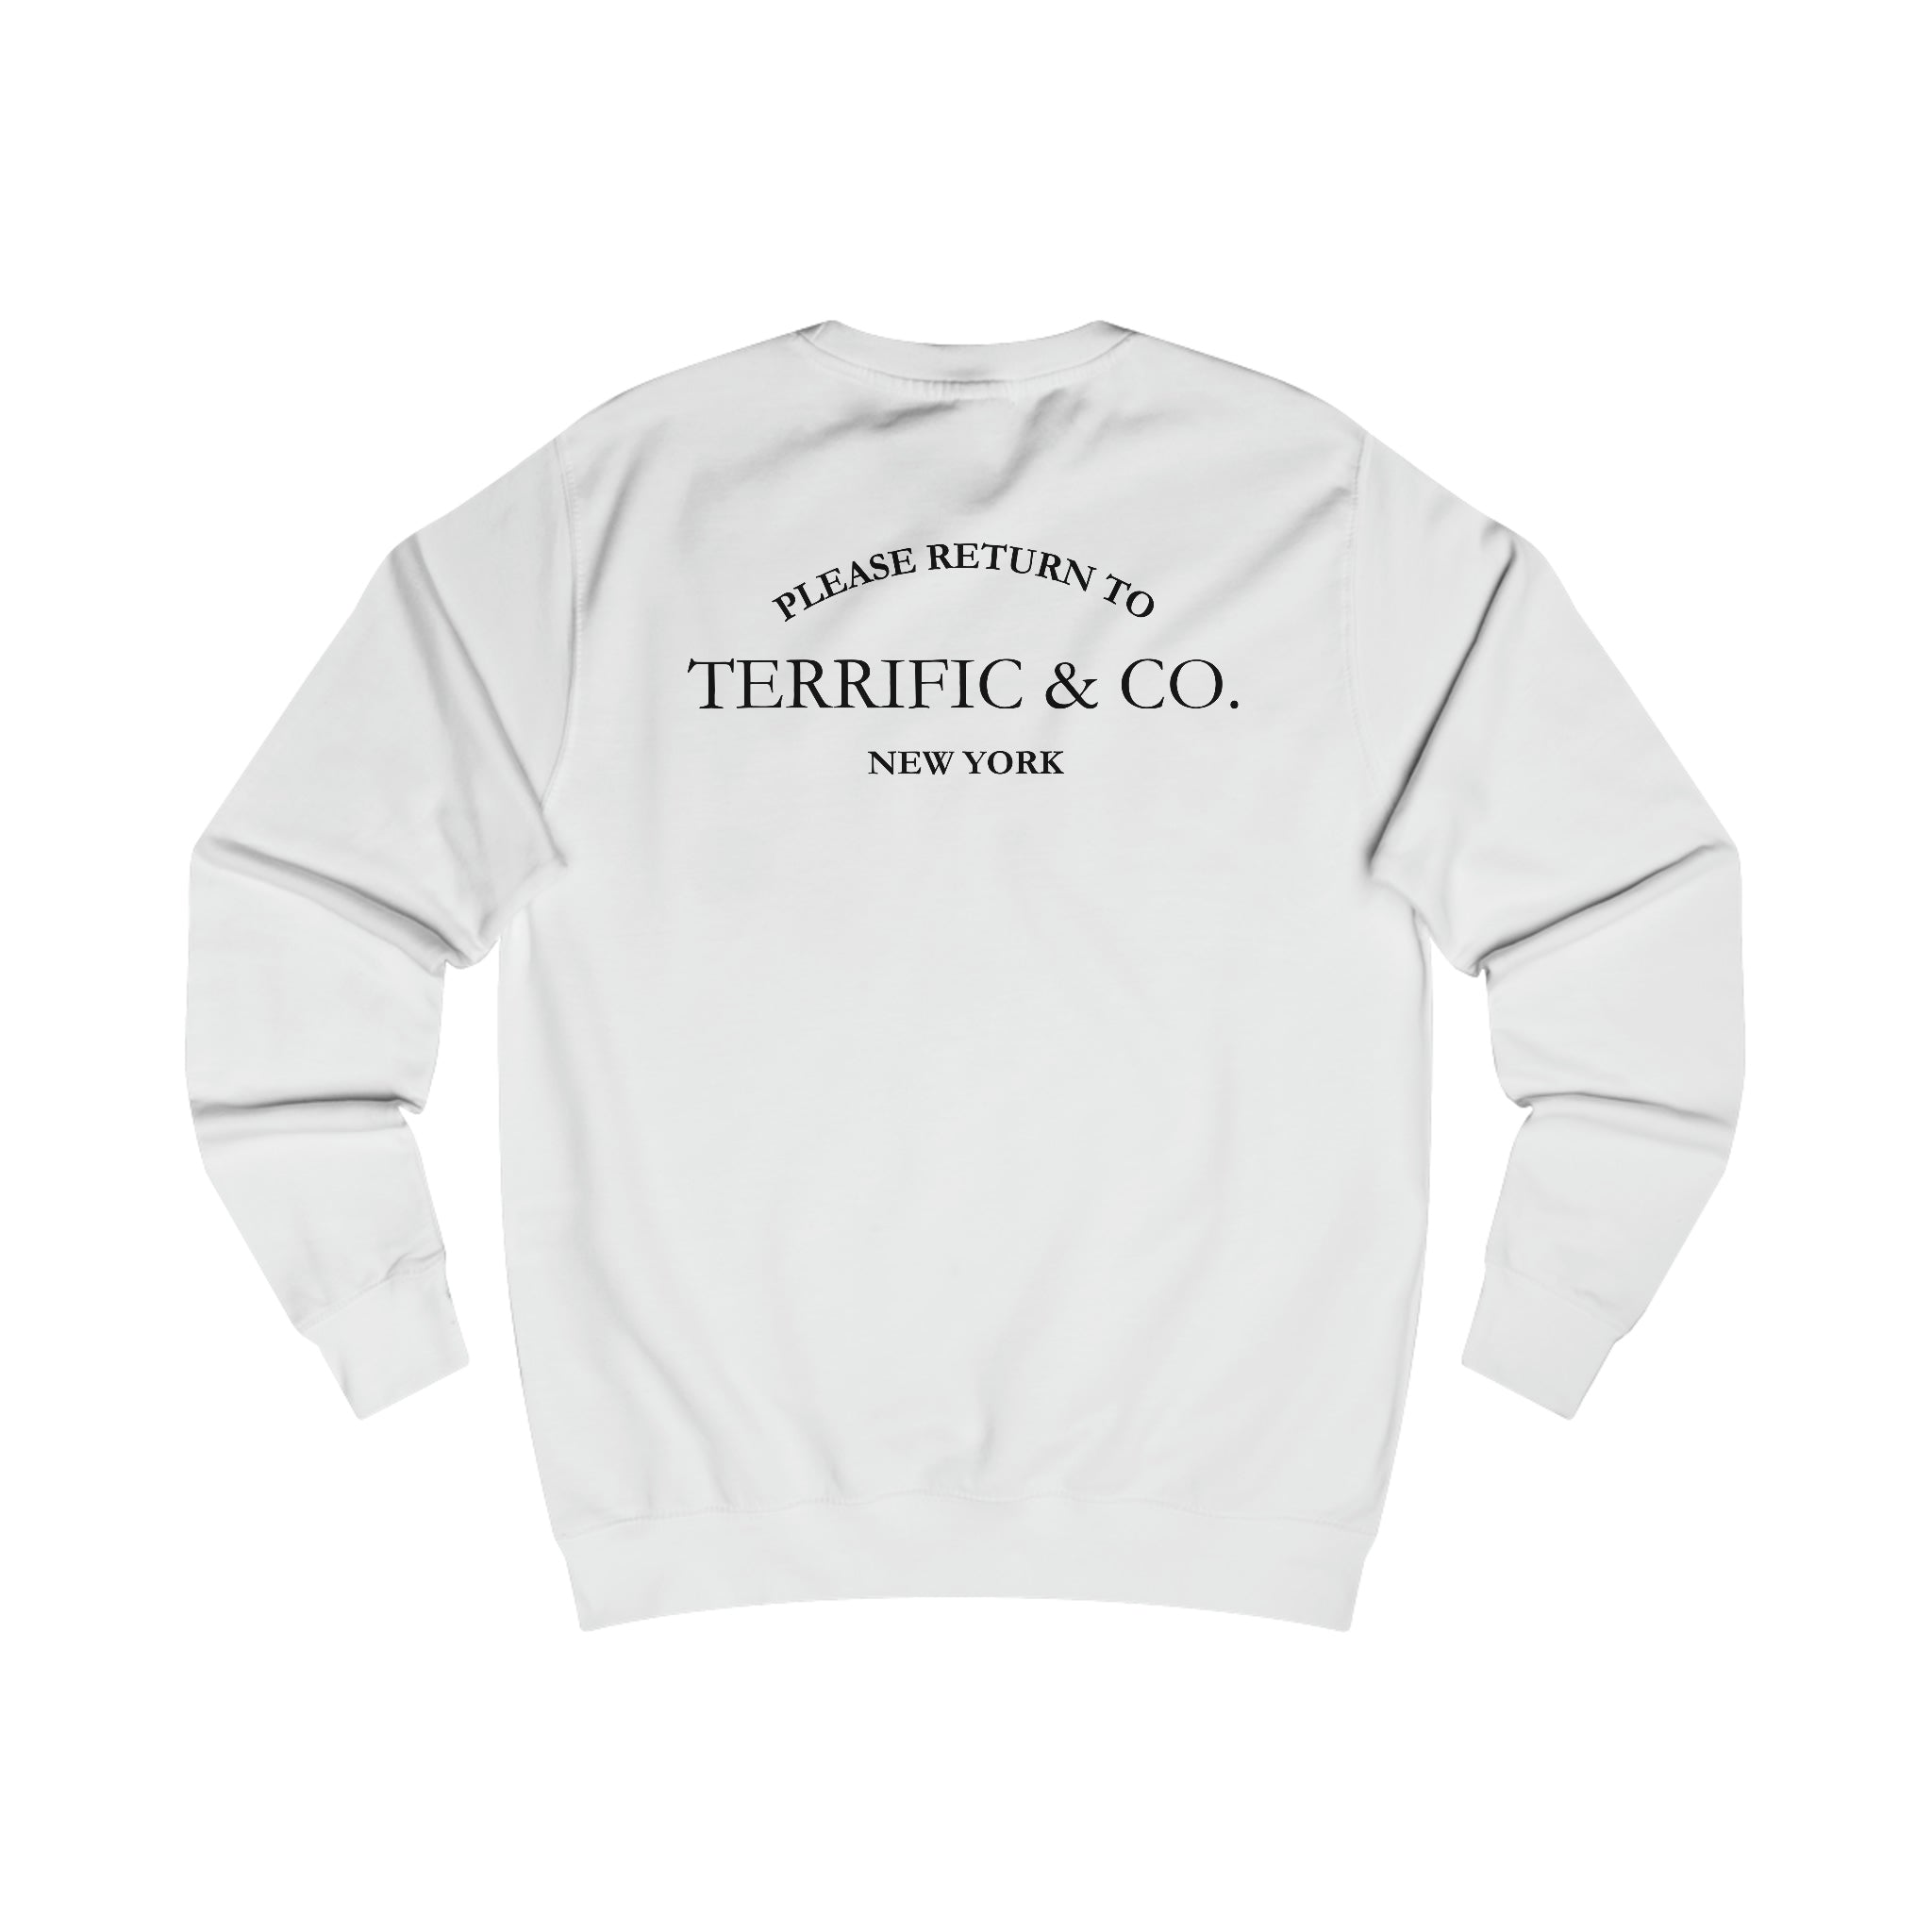 Please Return To Terrific and Co. (Presents) Designer inspired Relaxed Fit Unisex Sweatshirt Sweatshirt  The Middle Aged Groove